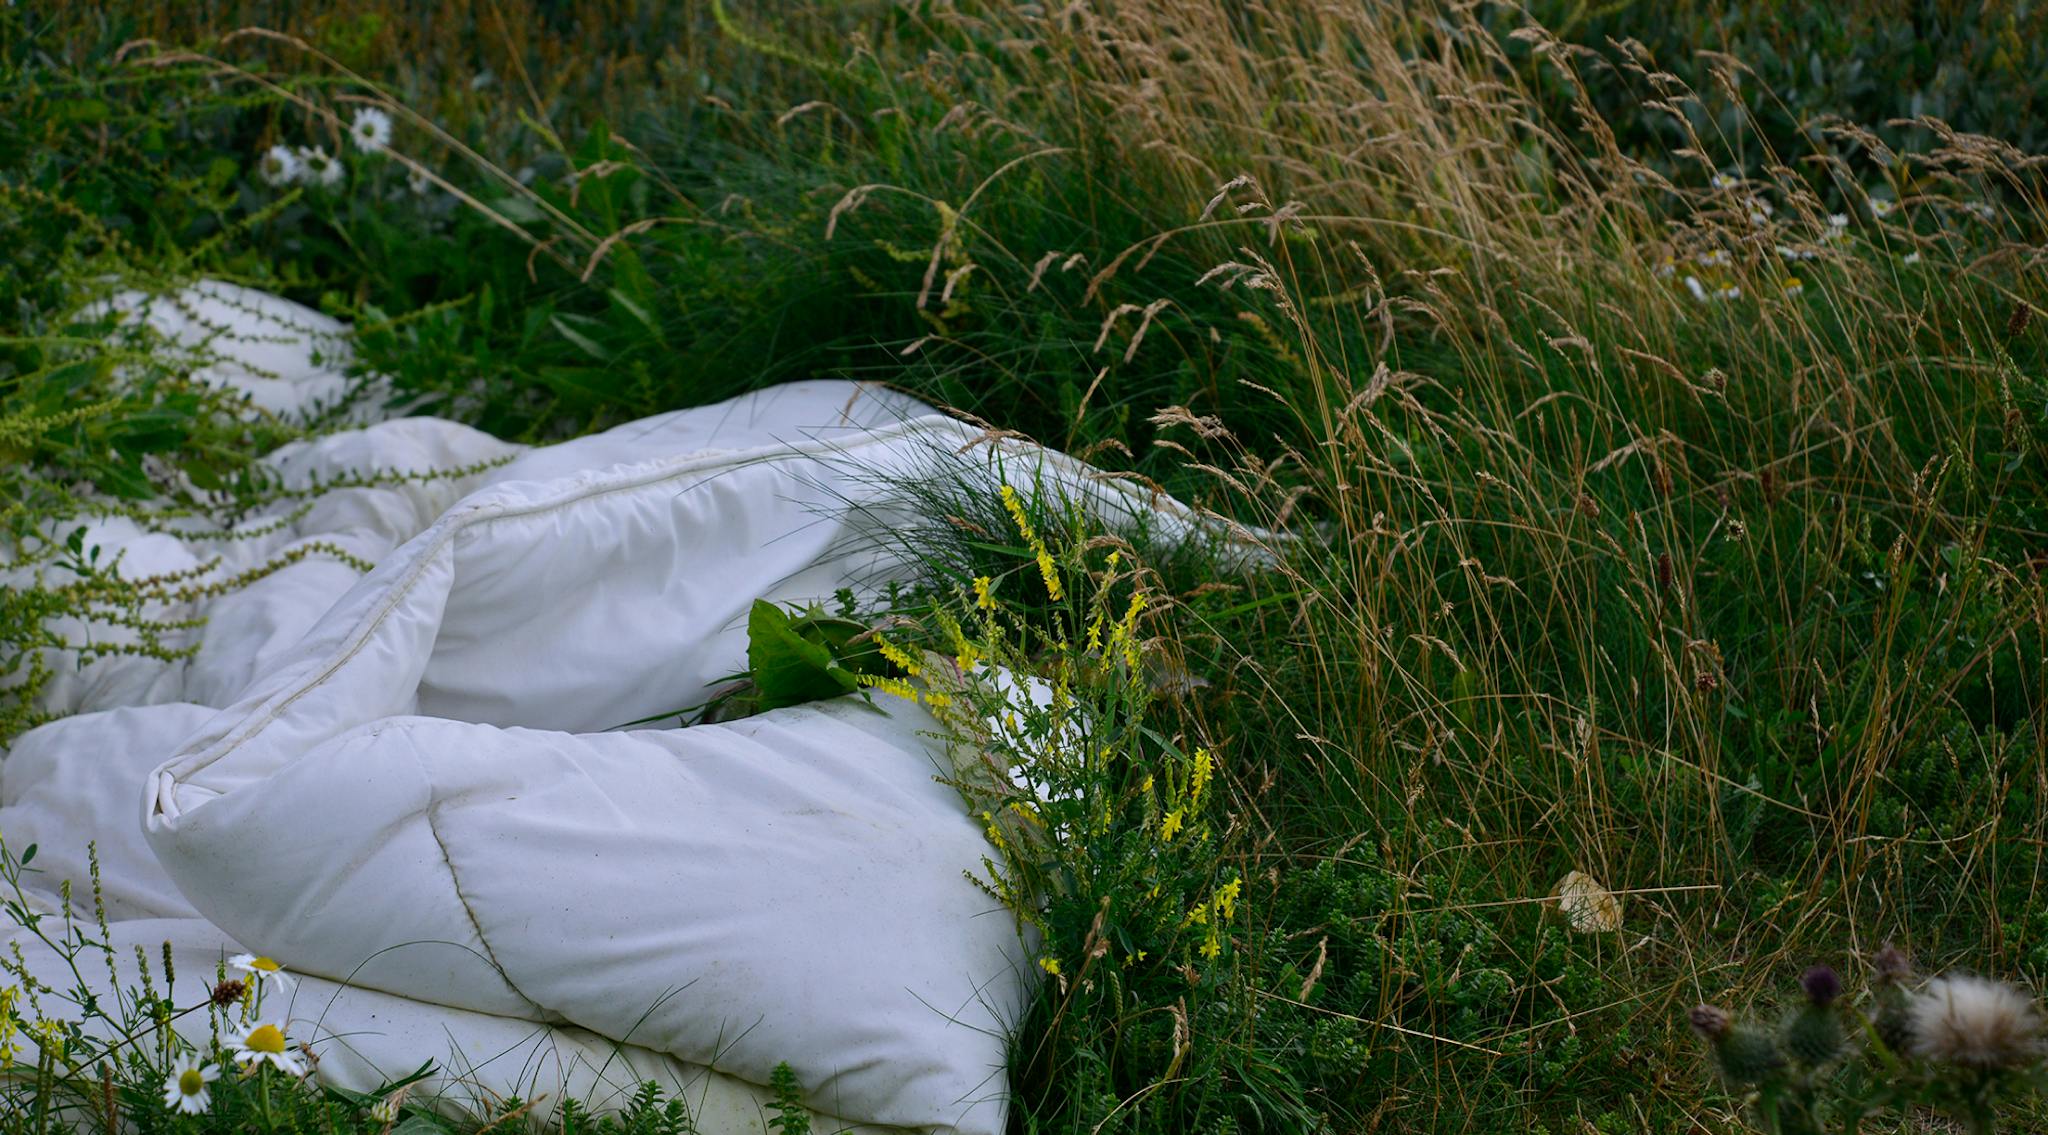 the image show a white duvet in on the grass with some yellow flowers